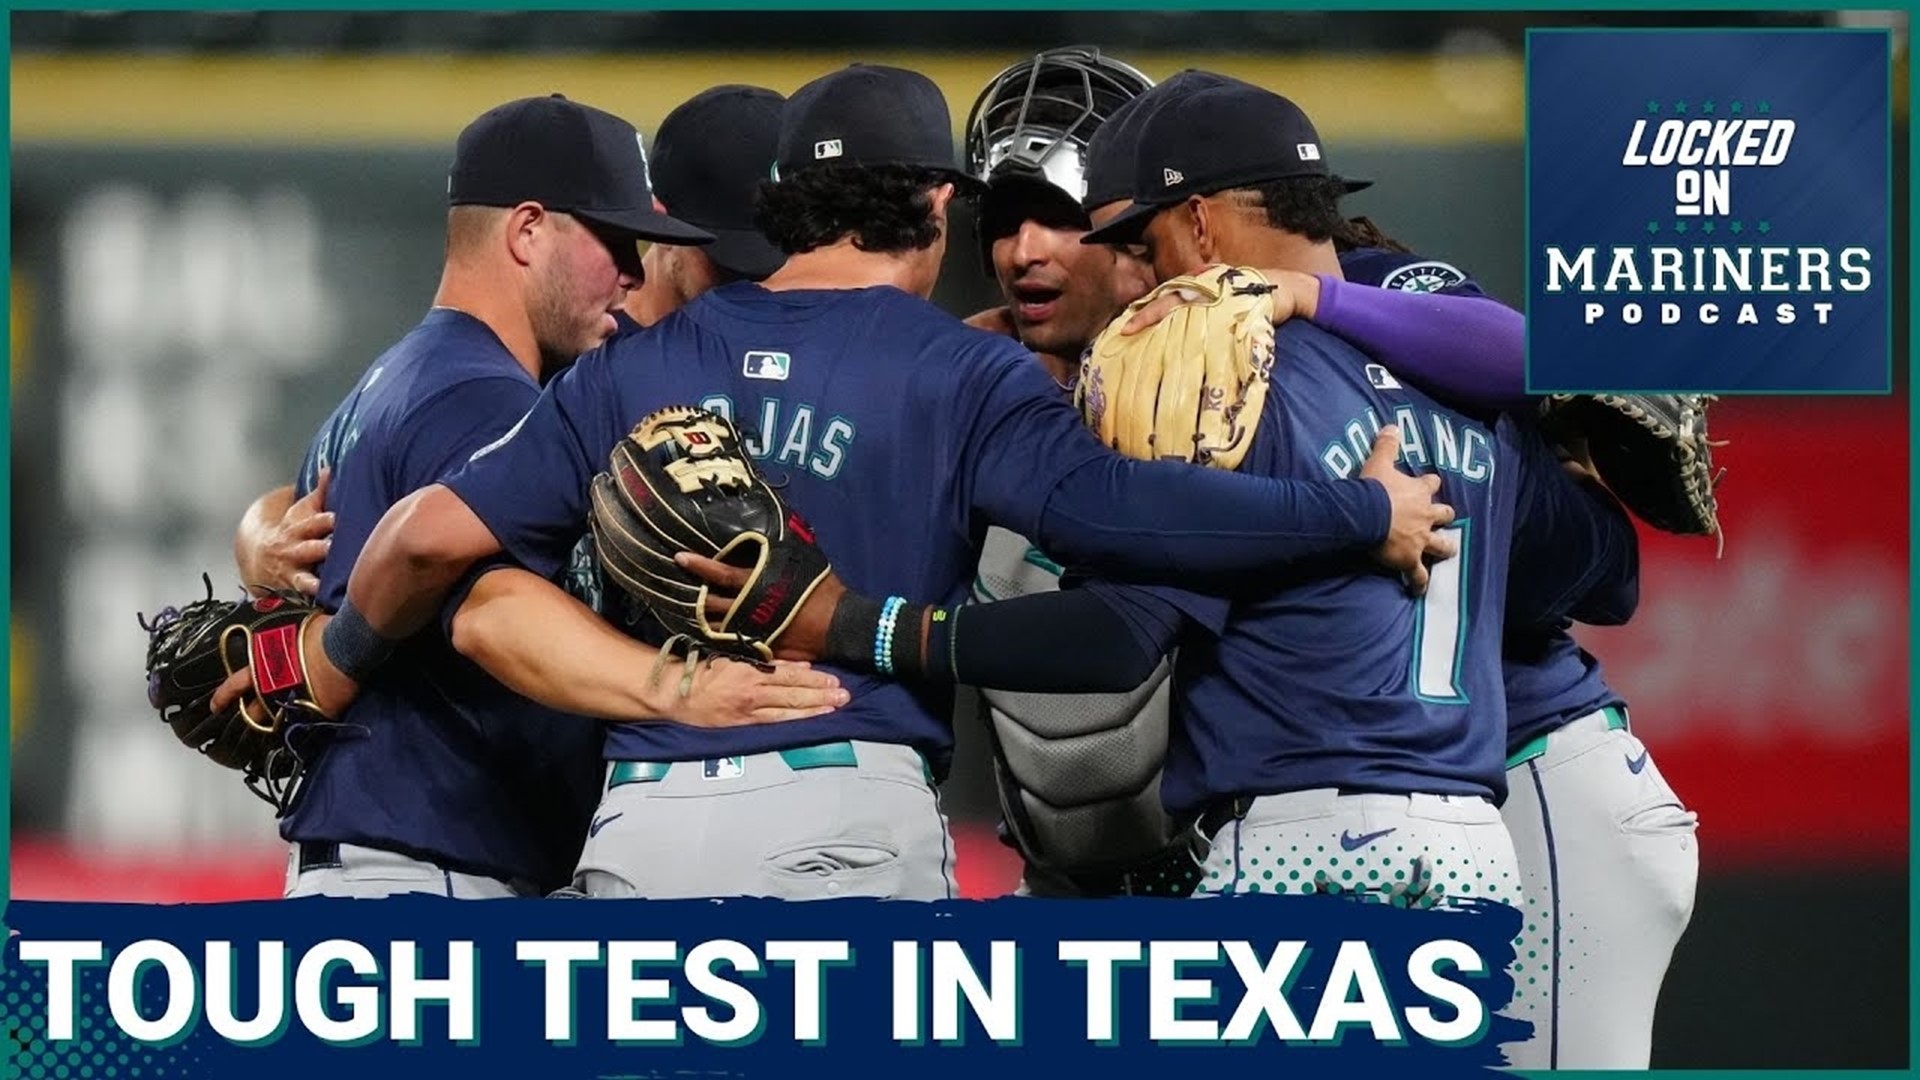 Mariners broadcaster Gary Hill Jr. joins the show again to help Ty and Colby preview the M's upcoming series against the defending champion Rangers.